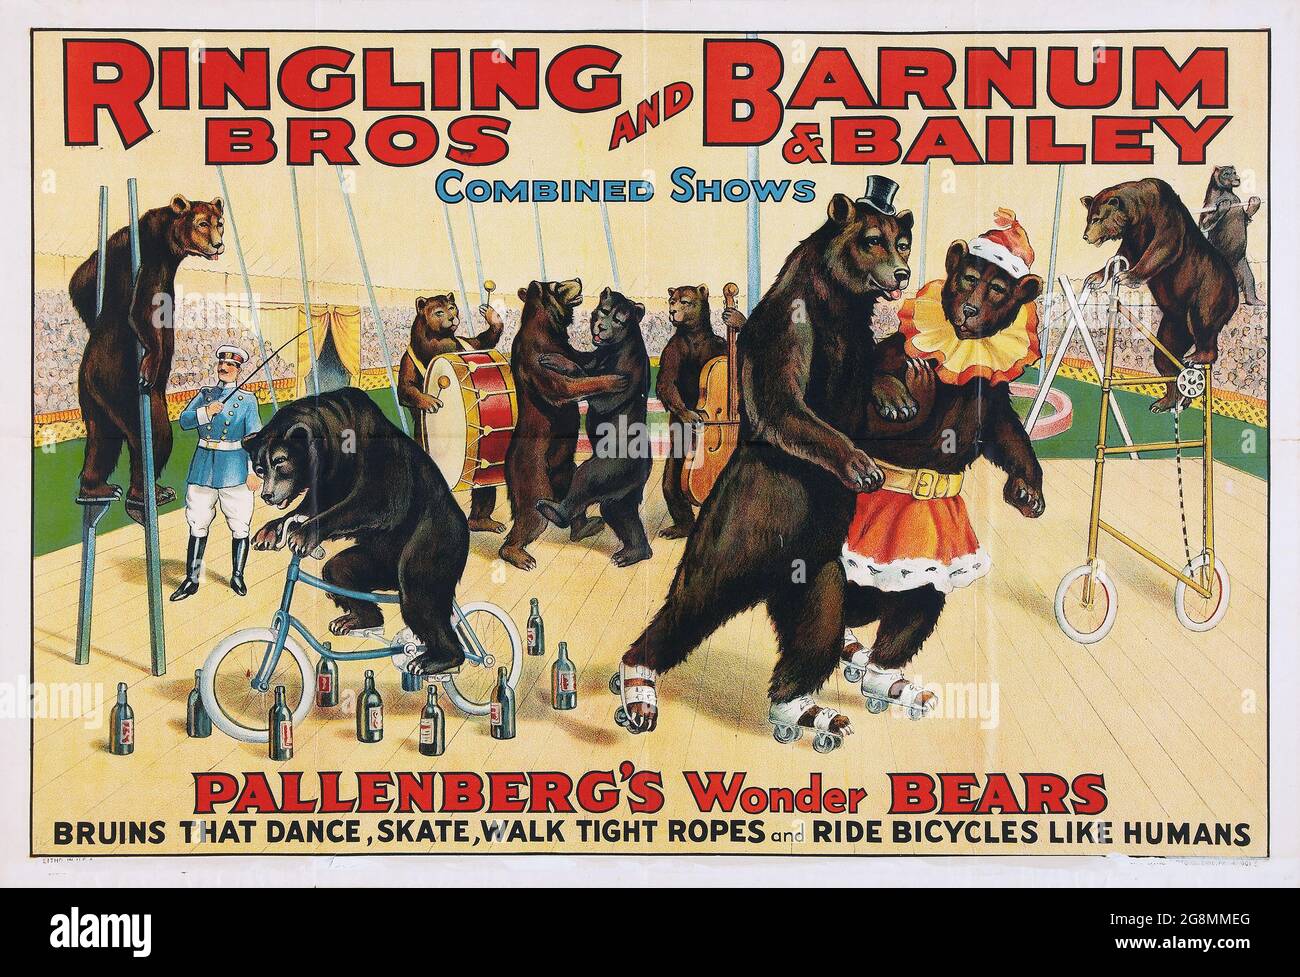 Vintage Circus Poster, Pallenbergs Wonder Bears. (Ringling Brothers and Barnum and Bailey, 1925). Stockfoto